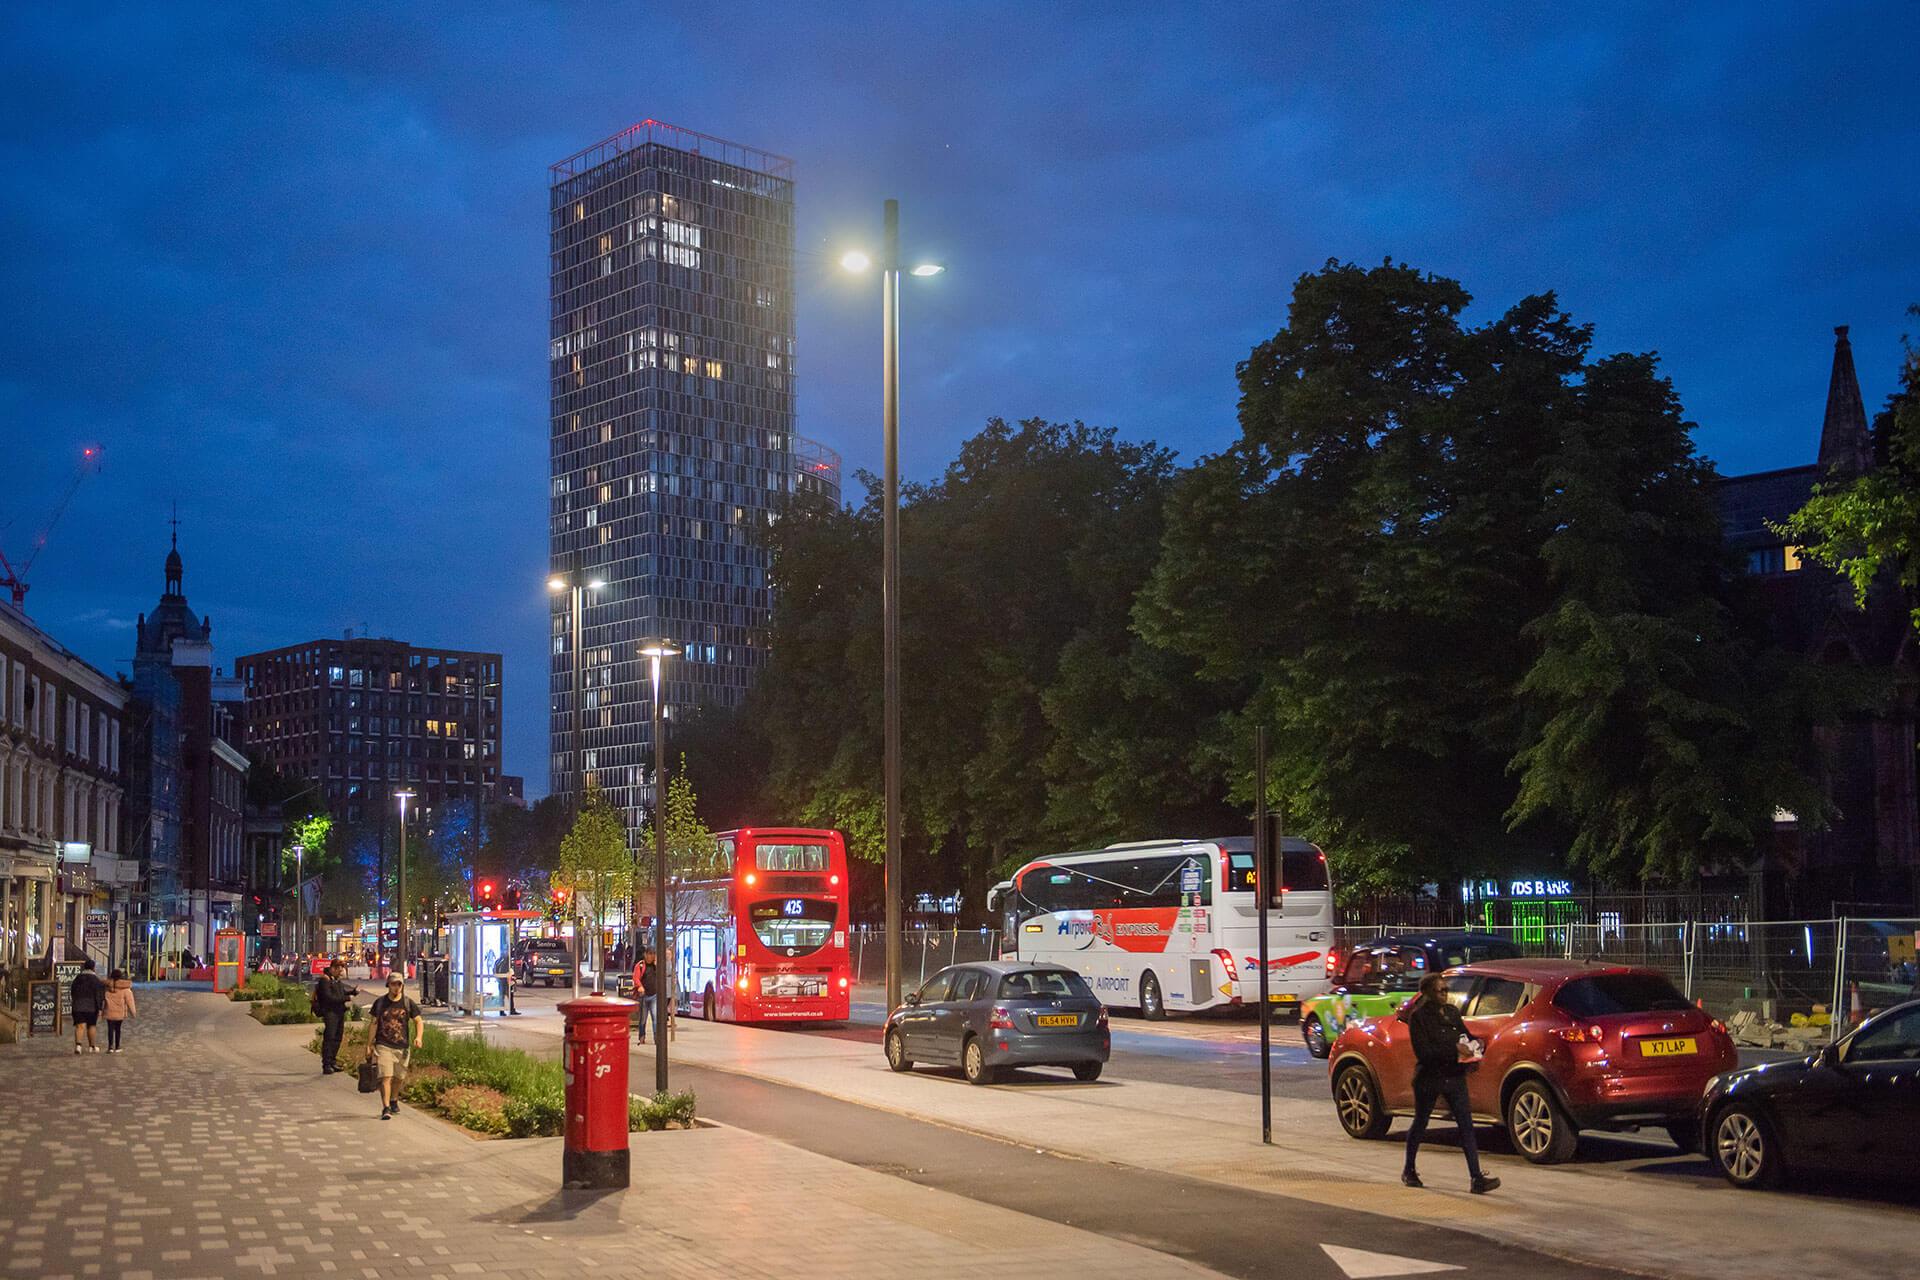 Yoa provides high-performing lighting network worthy of Stratford councils' investment